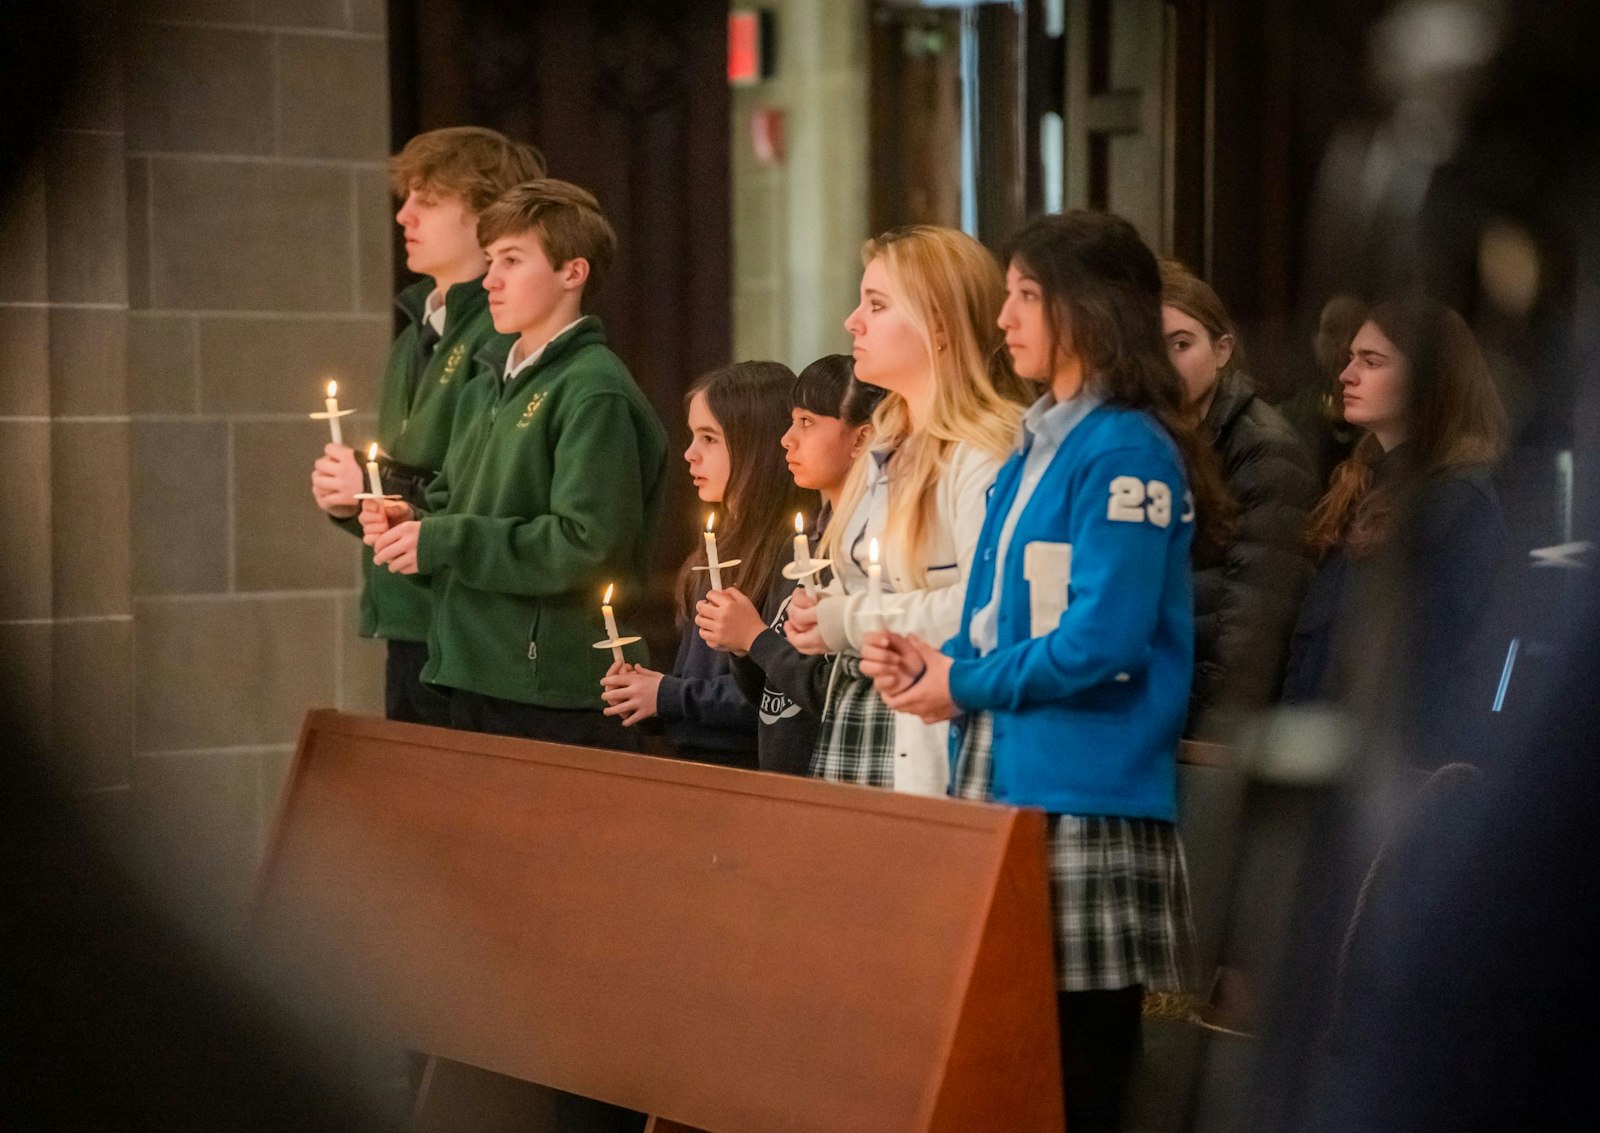 Catholic school students hold candles signifying the light of Christ during the annual Catholic Schools Week Mass at the Cathedral of the Most Blessed Sacrament on Feb. 2. The Mass also took place during the feast of the Presentation of the Lord, traditionally known as Candlemas. (Photos by Valaurian Waller | Detroit Catholic)